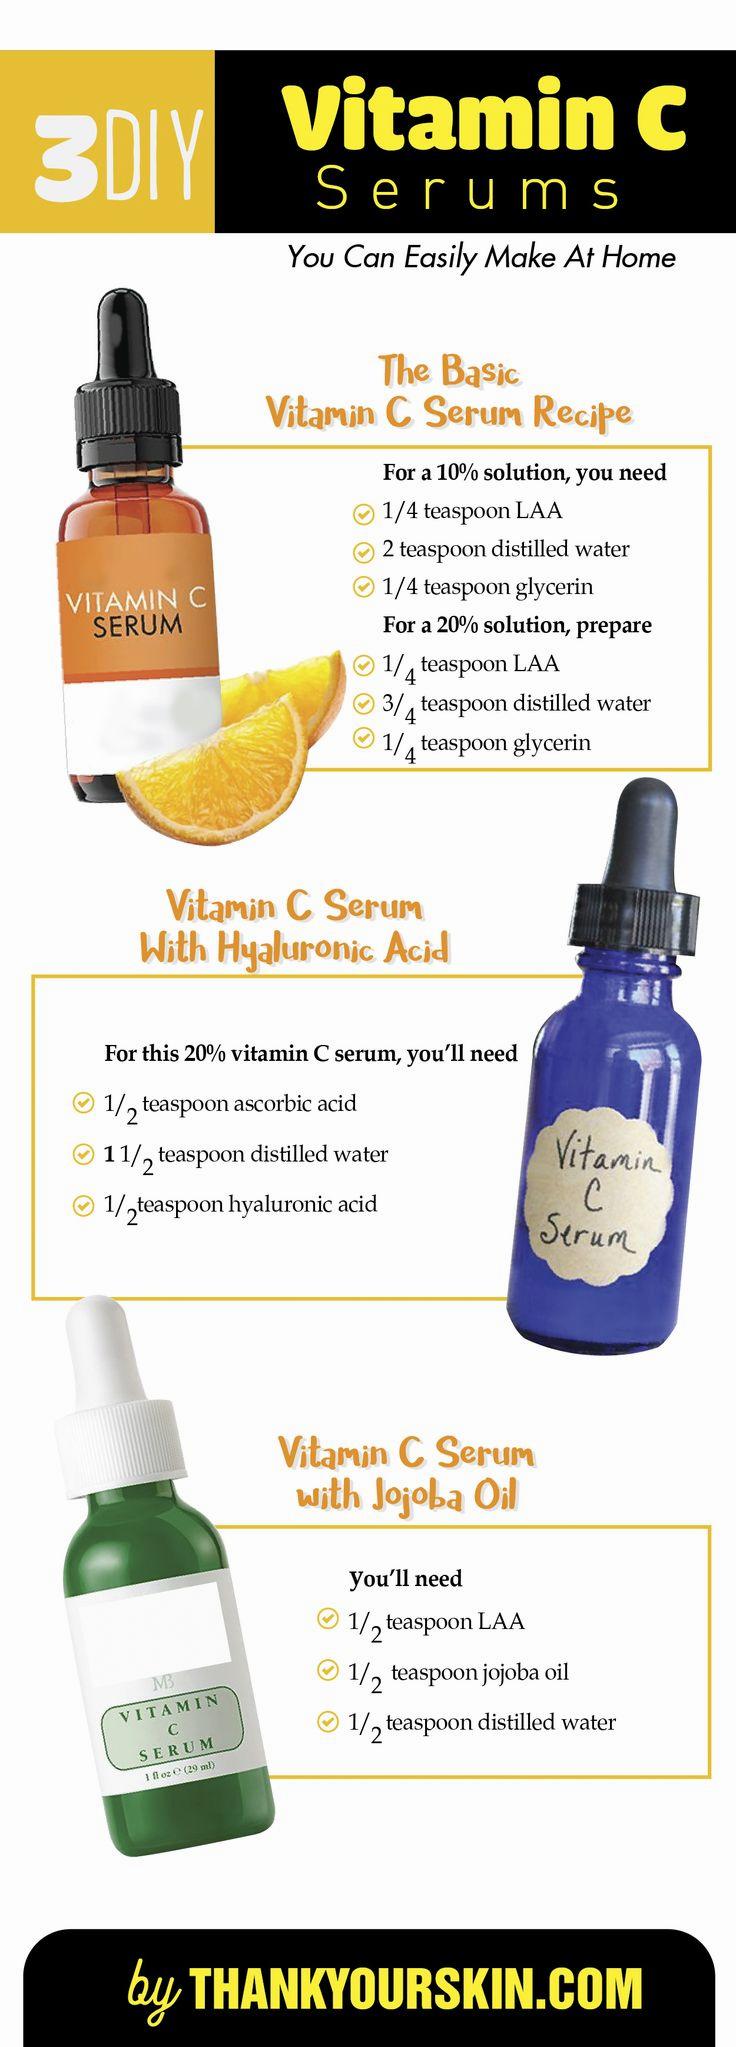 Three different recipes for making your own vitamin C serum at home.